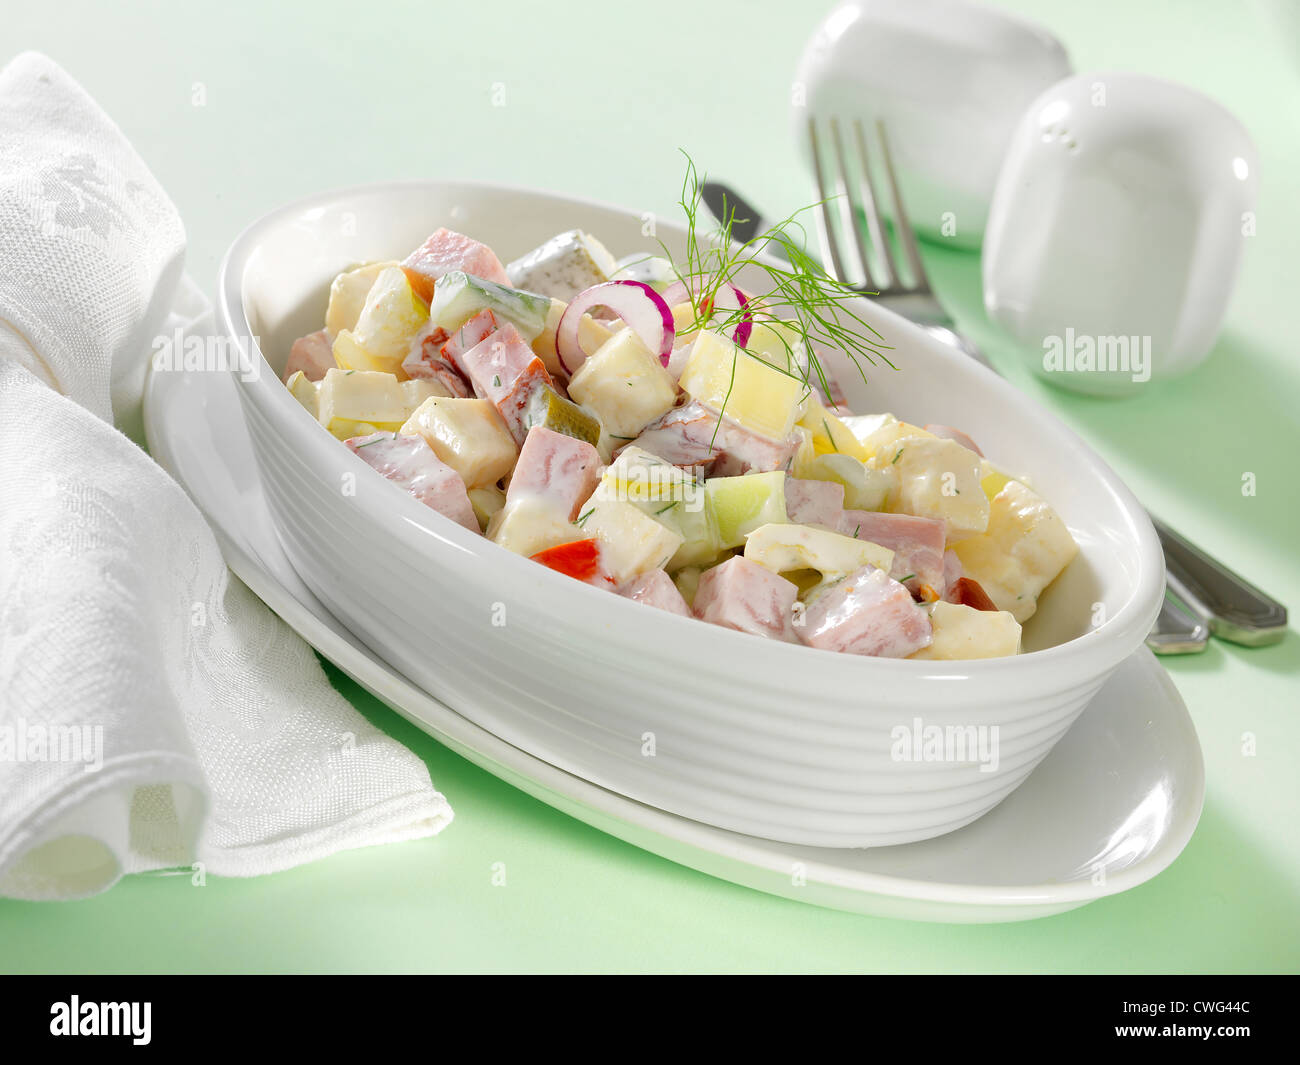 cheese salad in white plate on light background Stock Photo